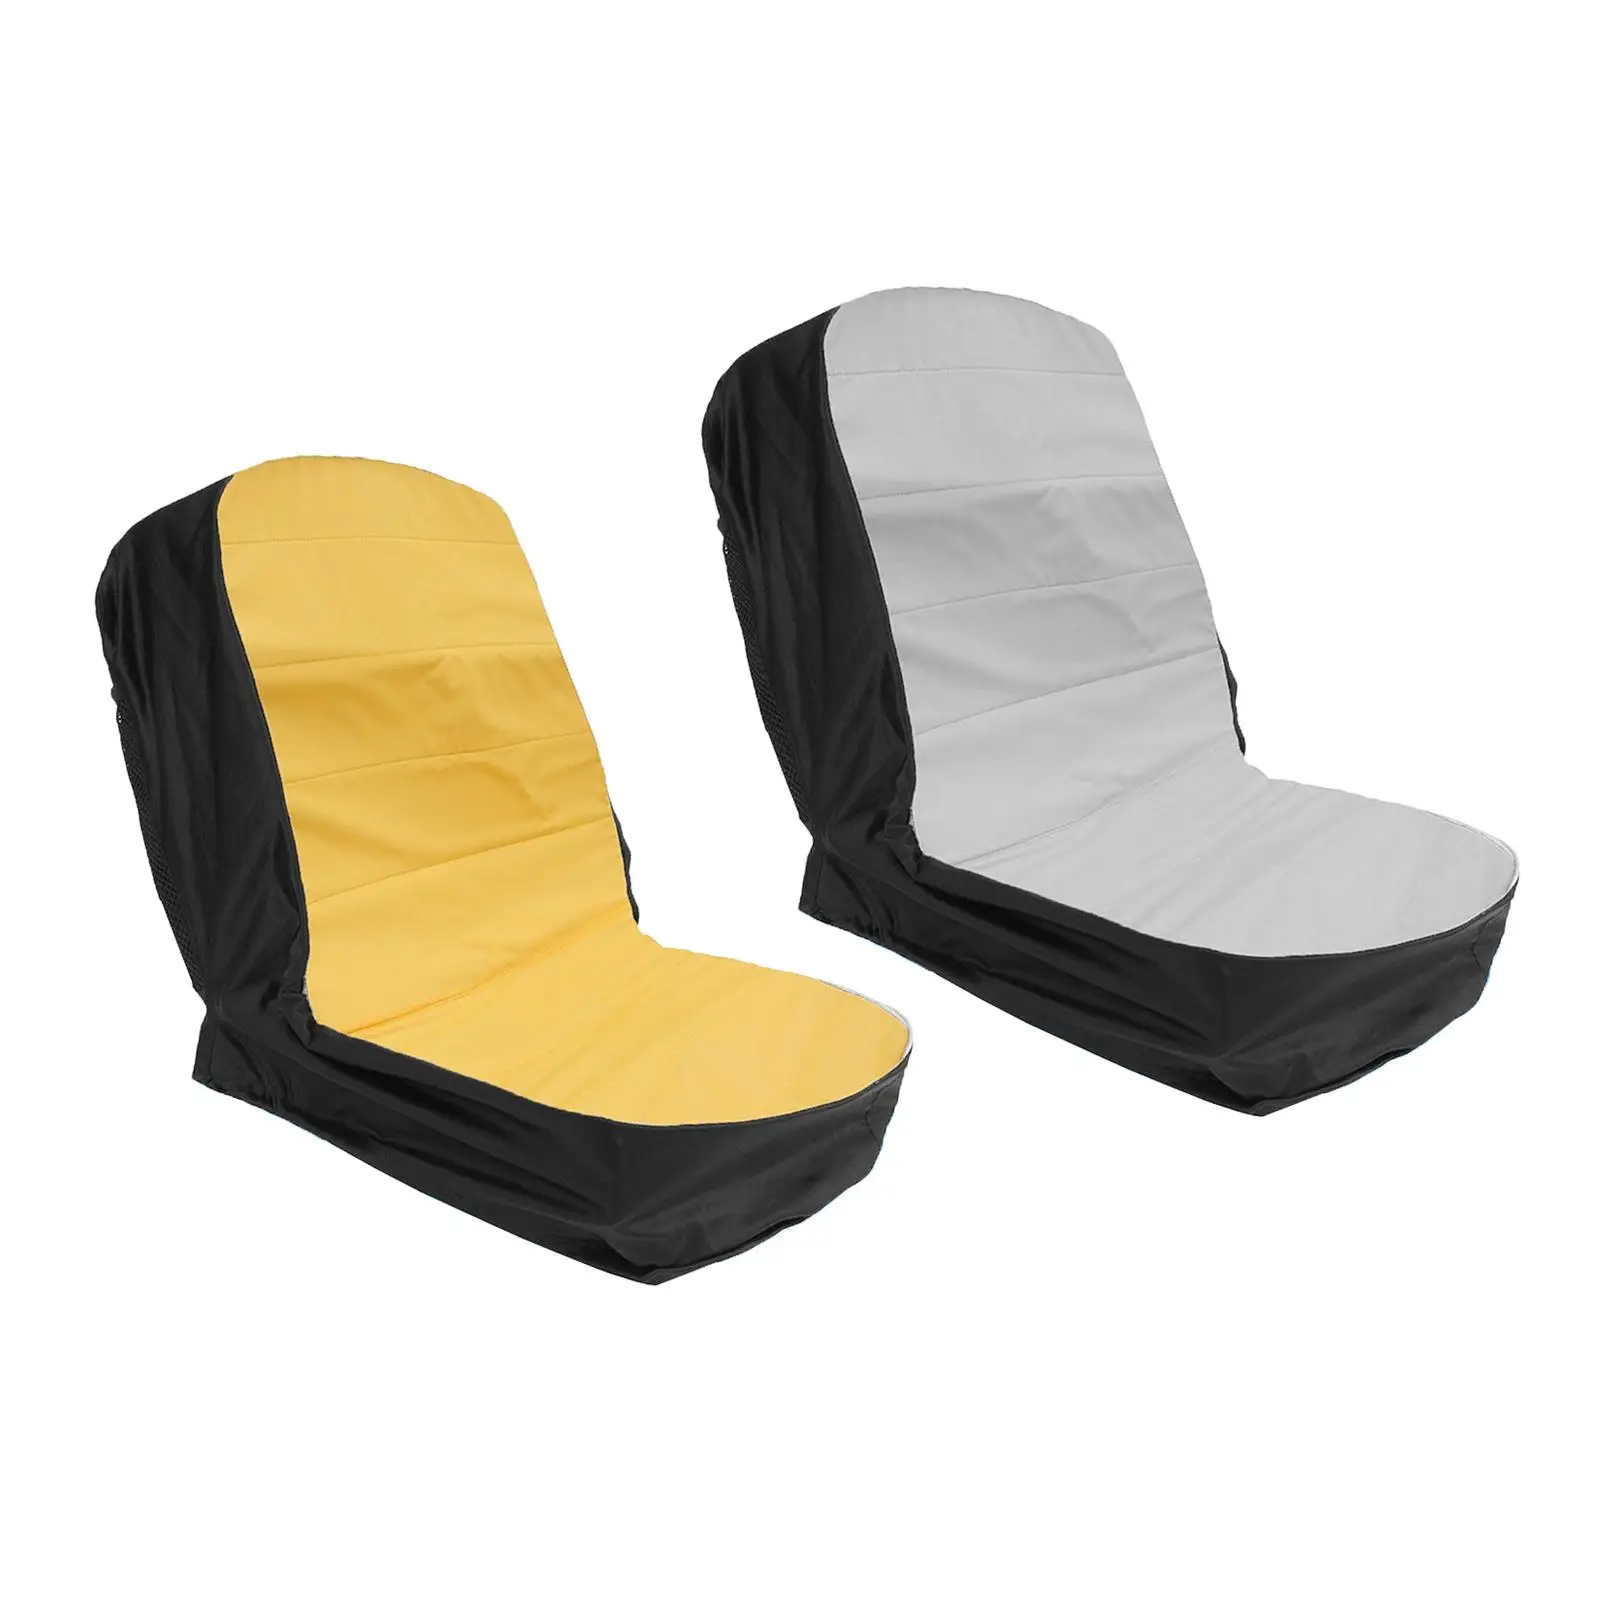 Tractor Mower Seat Cover Protector Dustproof Lawn Riding Outdoor Backrest Accessory for Heavy Farm Vehicle Forklift